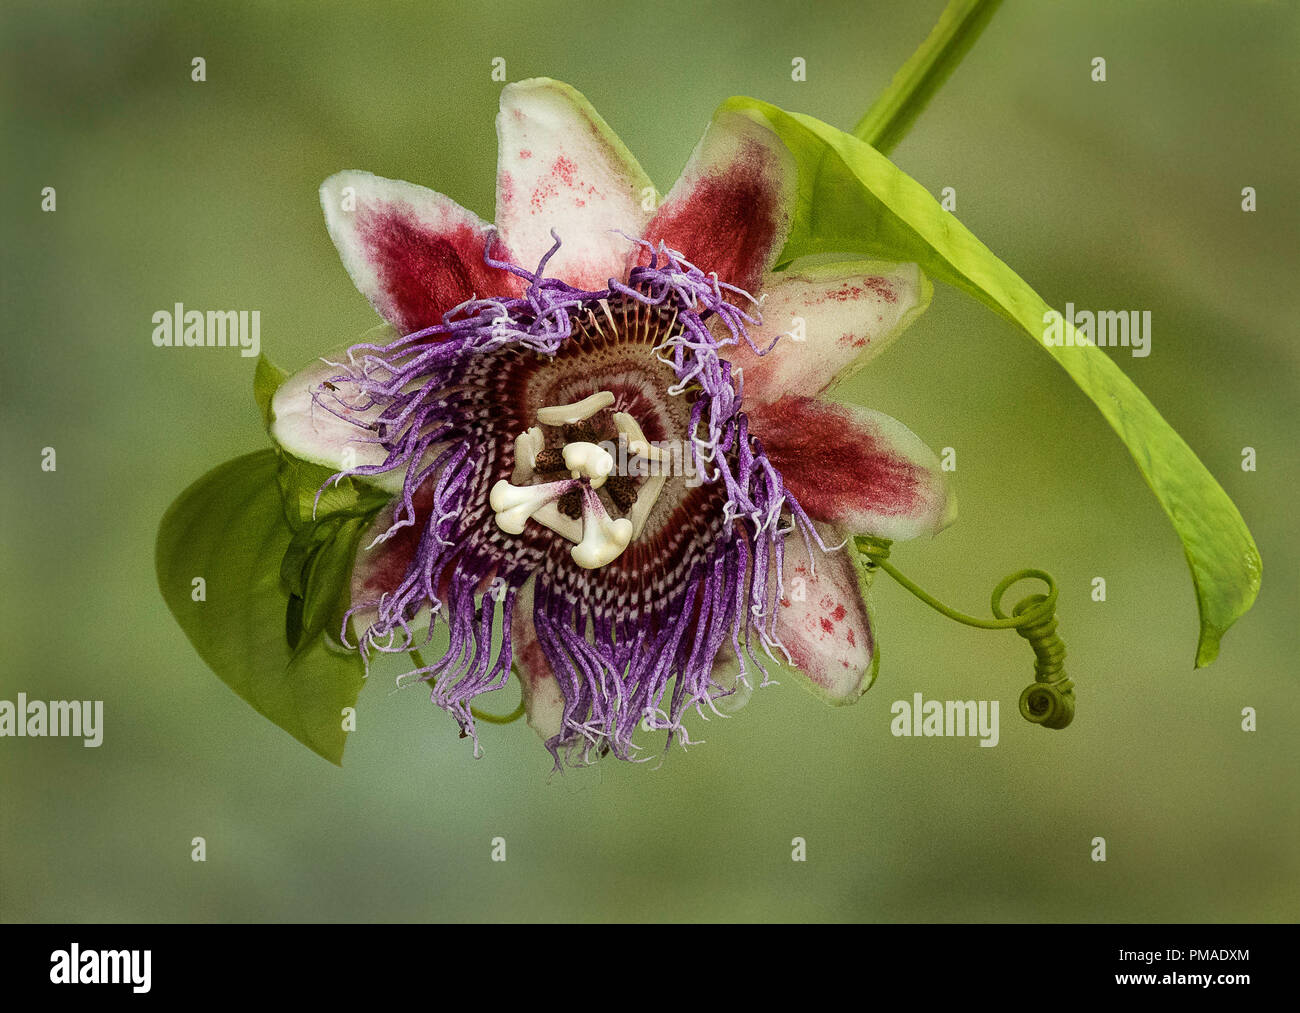 A purple passion flower photographed in Costa Rica Stock Photo